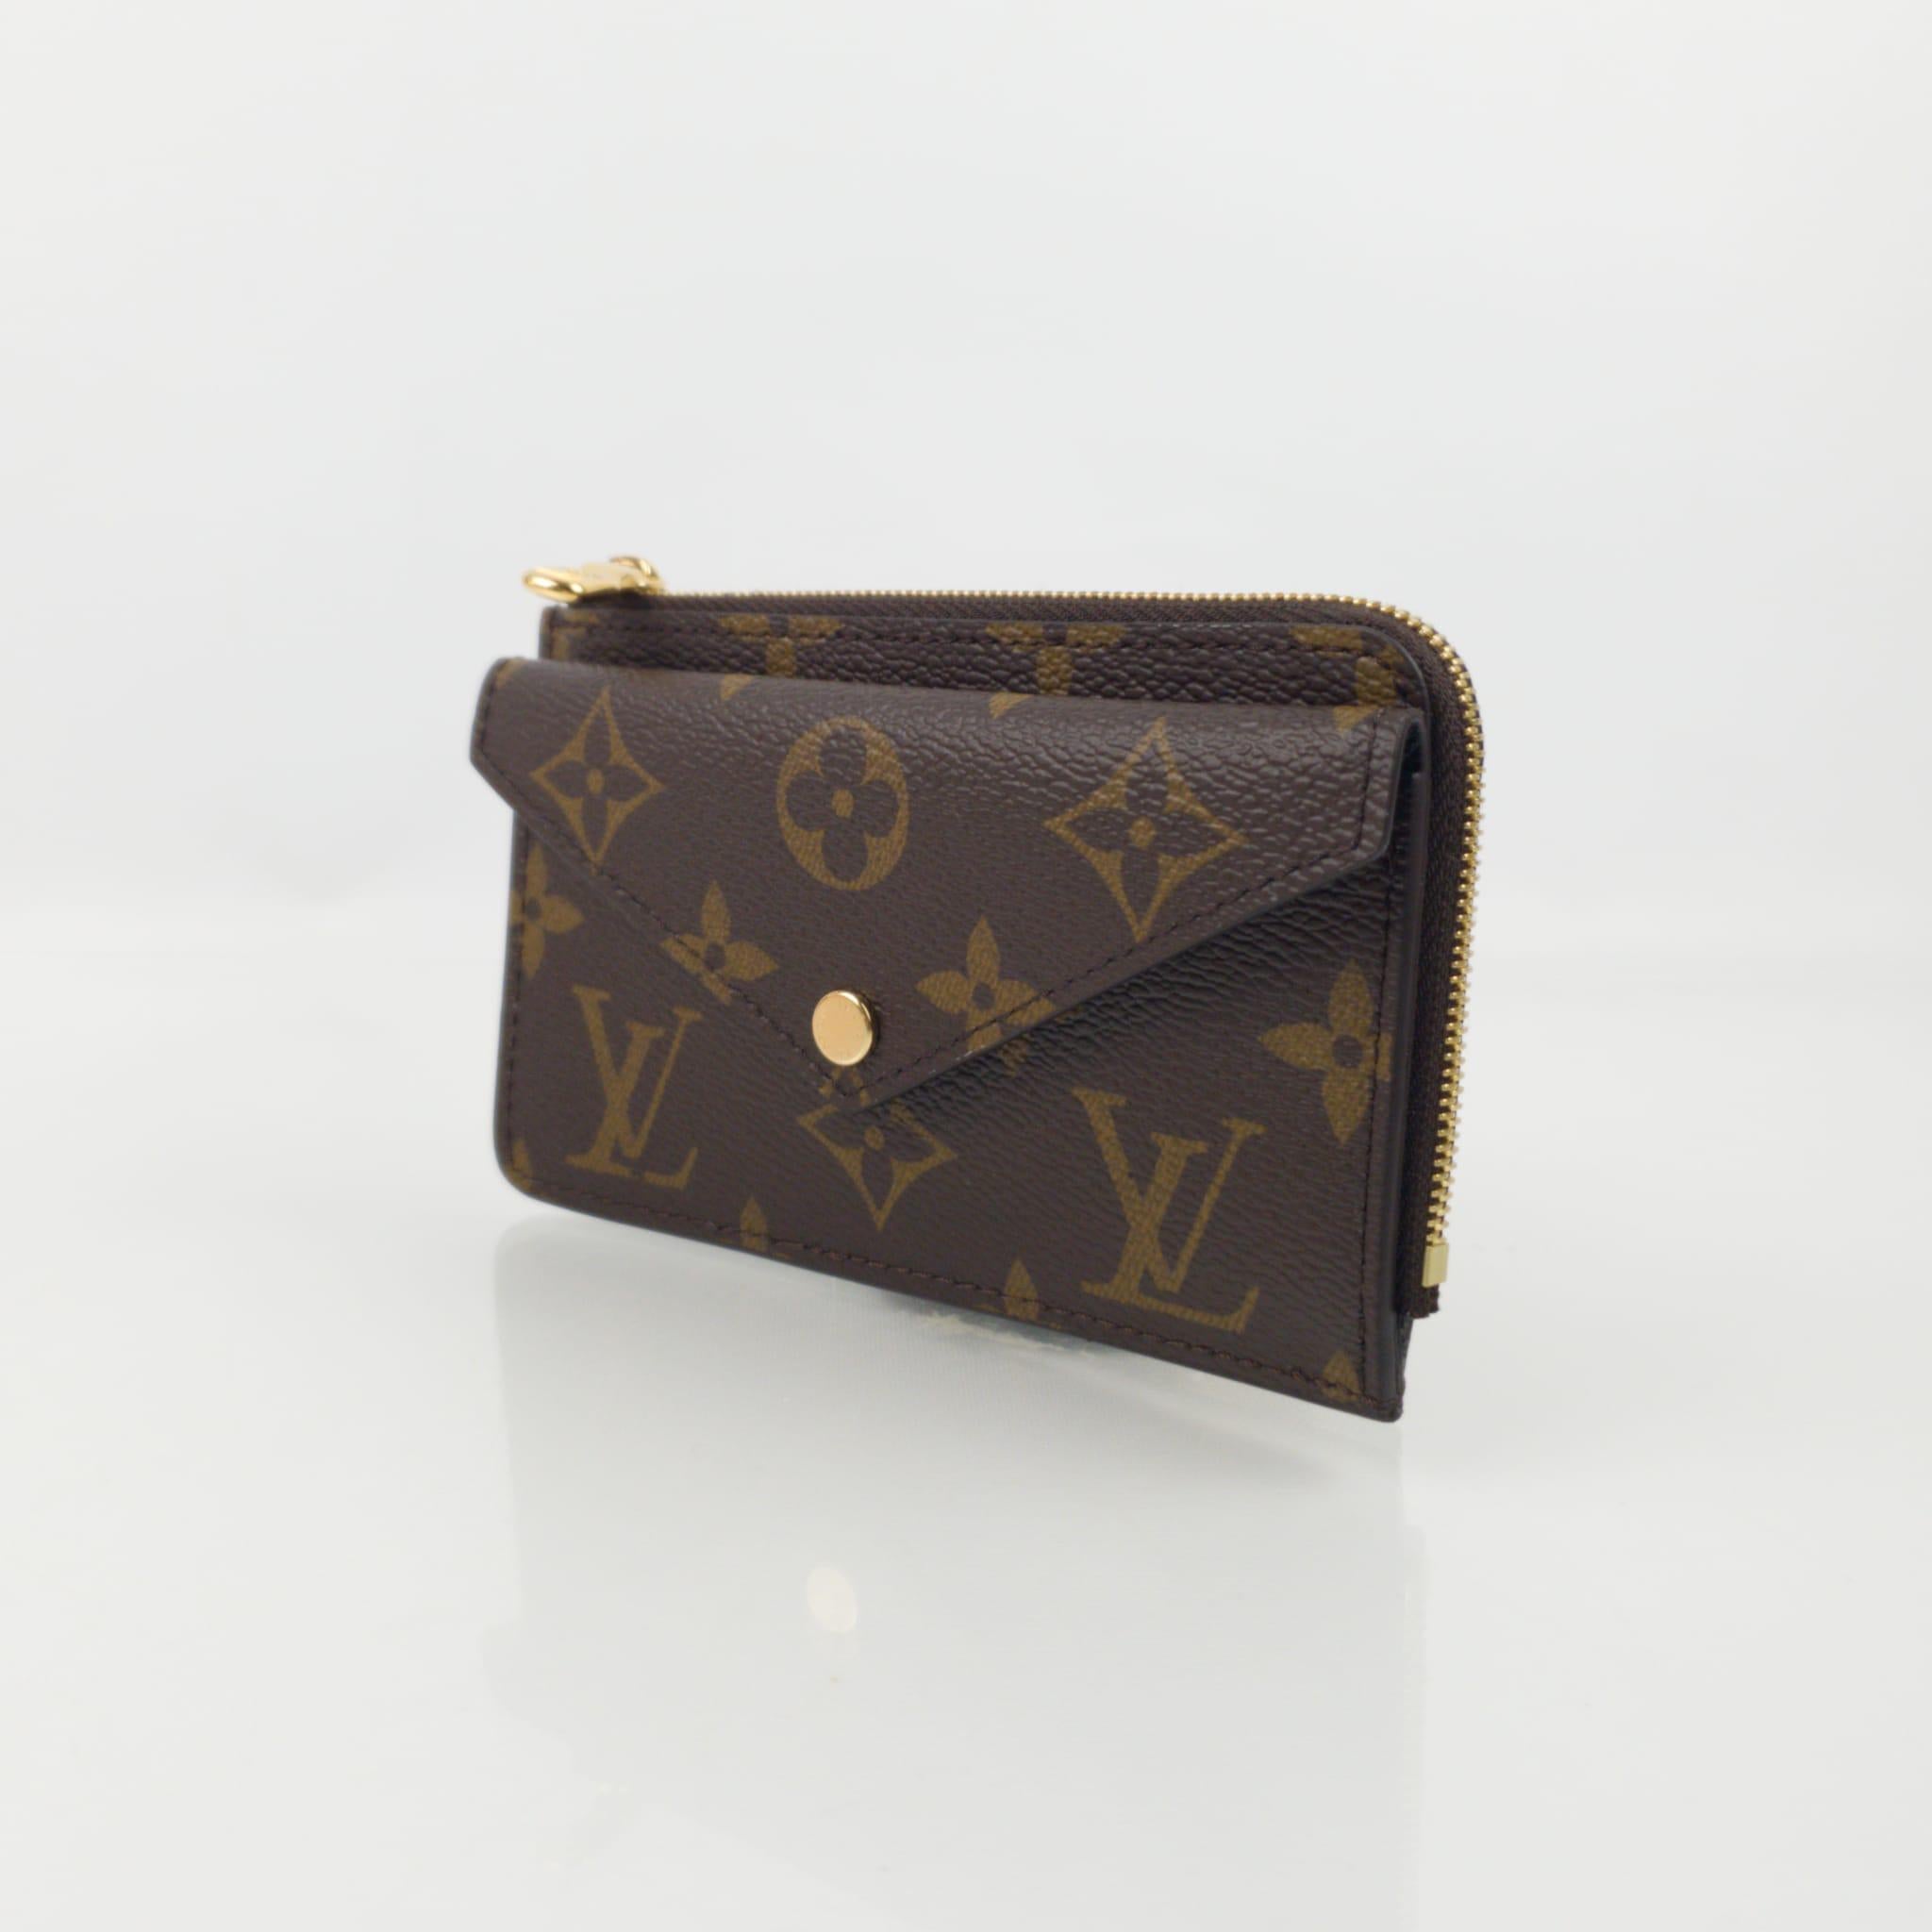  This Recto Verso card holder is crafted from Monogram canvas and trimmed with elegant leather trim. It features a front envelope pocket and a central pocket for folded bills, as well as three card slots on the back and a coin compartment with a